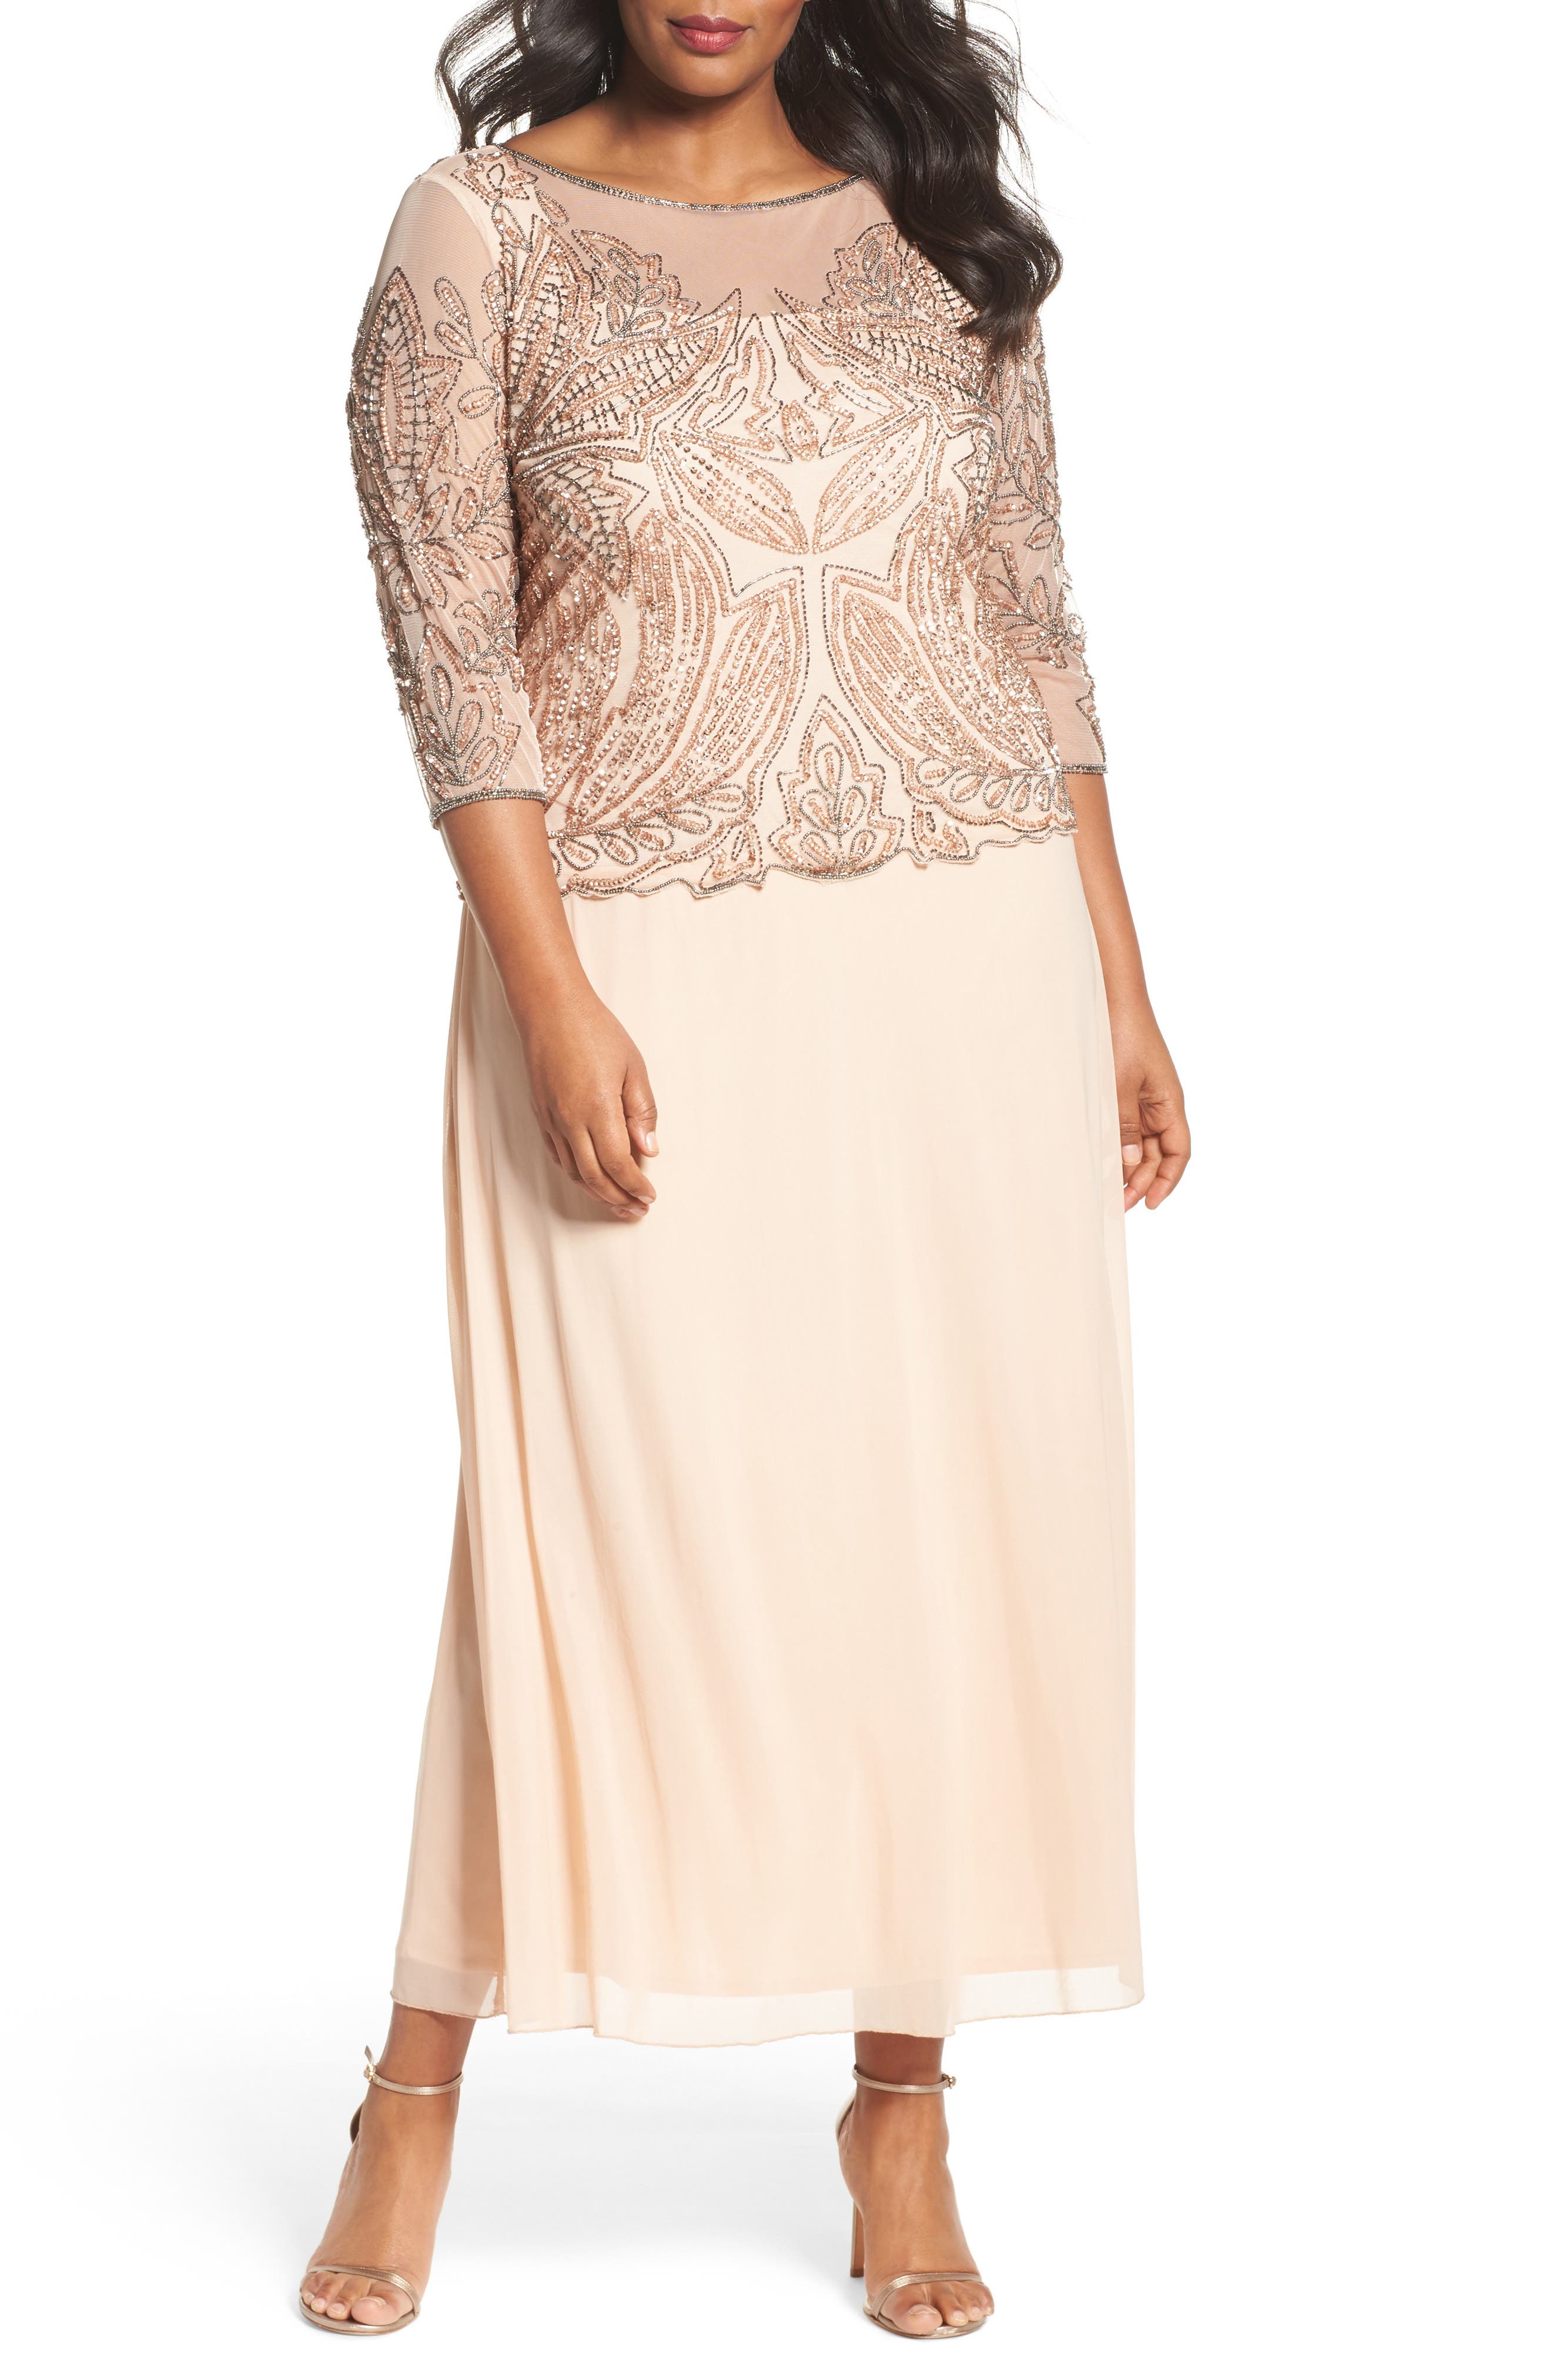 Women's Mother Of The Bride Plus-Size Dresses | Nordstrom